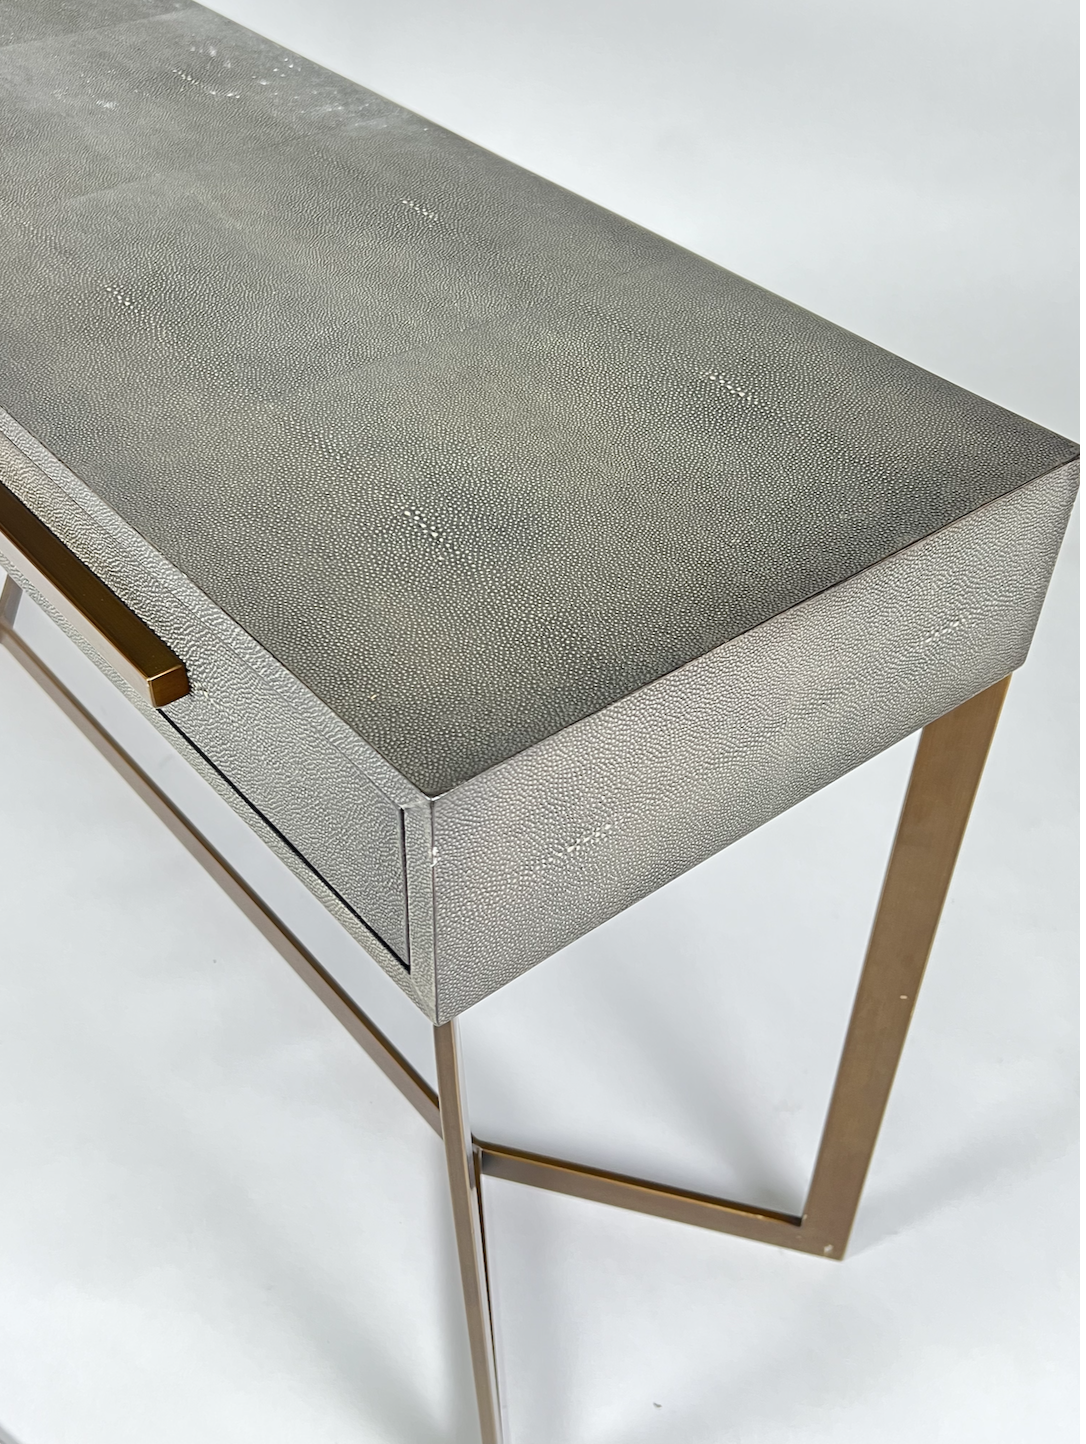 Gray shagreen and brass console table or desk